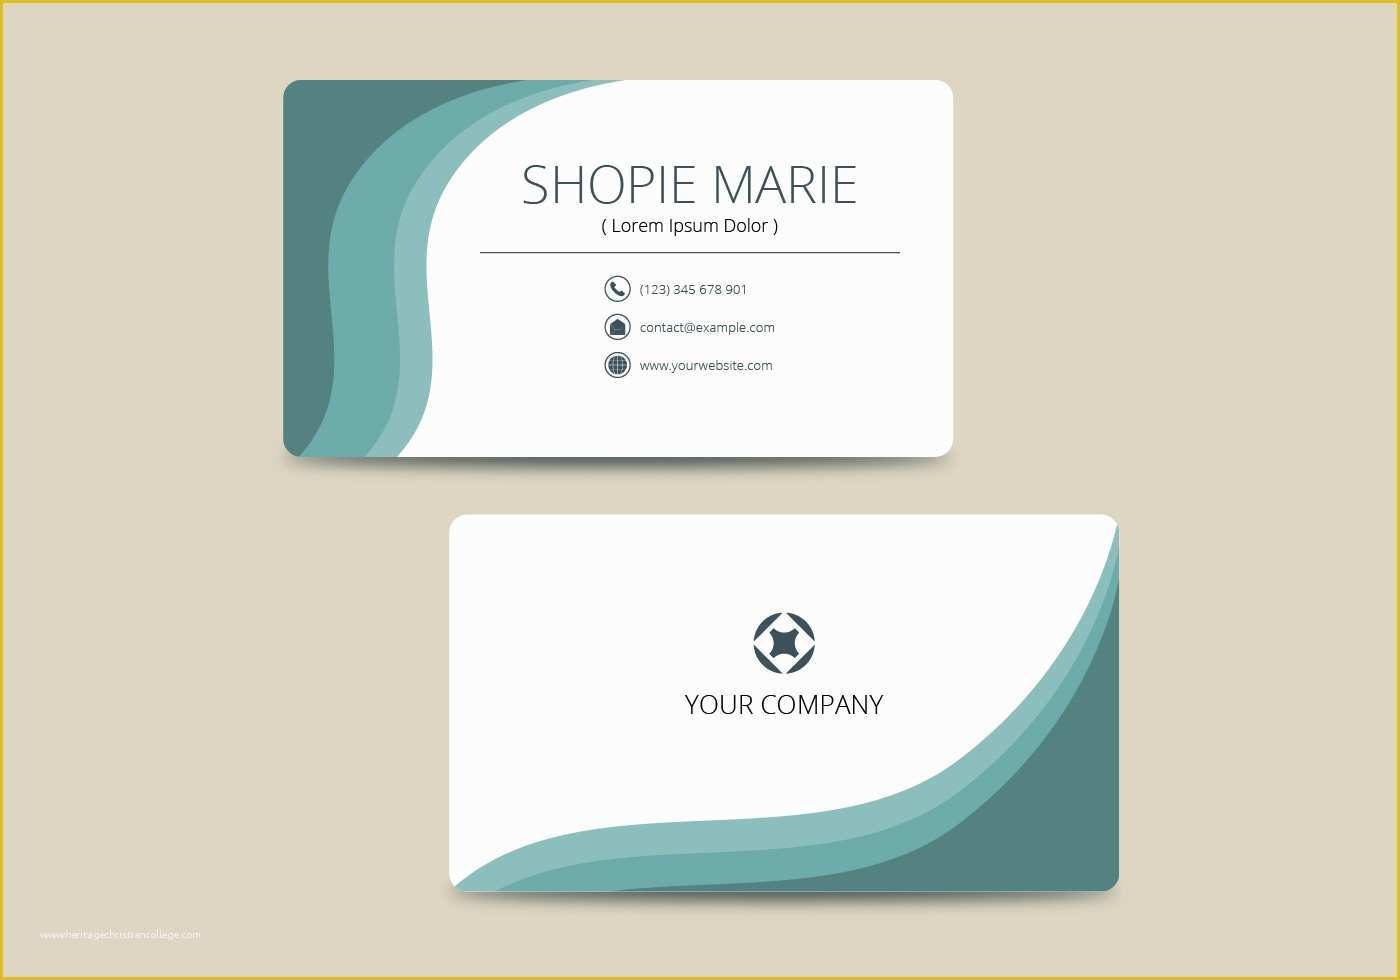 Business Card Template Free Download Publisher Of Teal Business Card Template Vector Download Free Vector